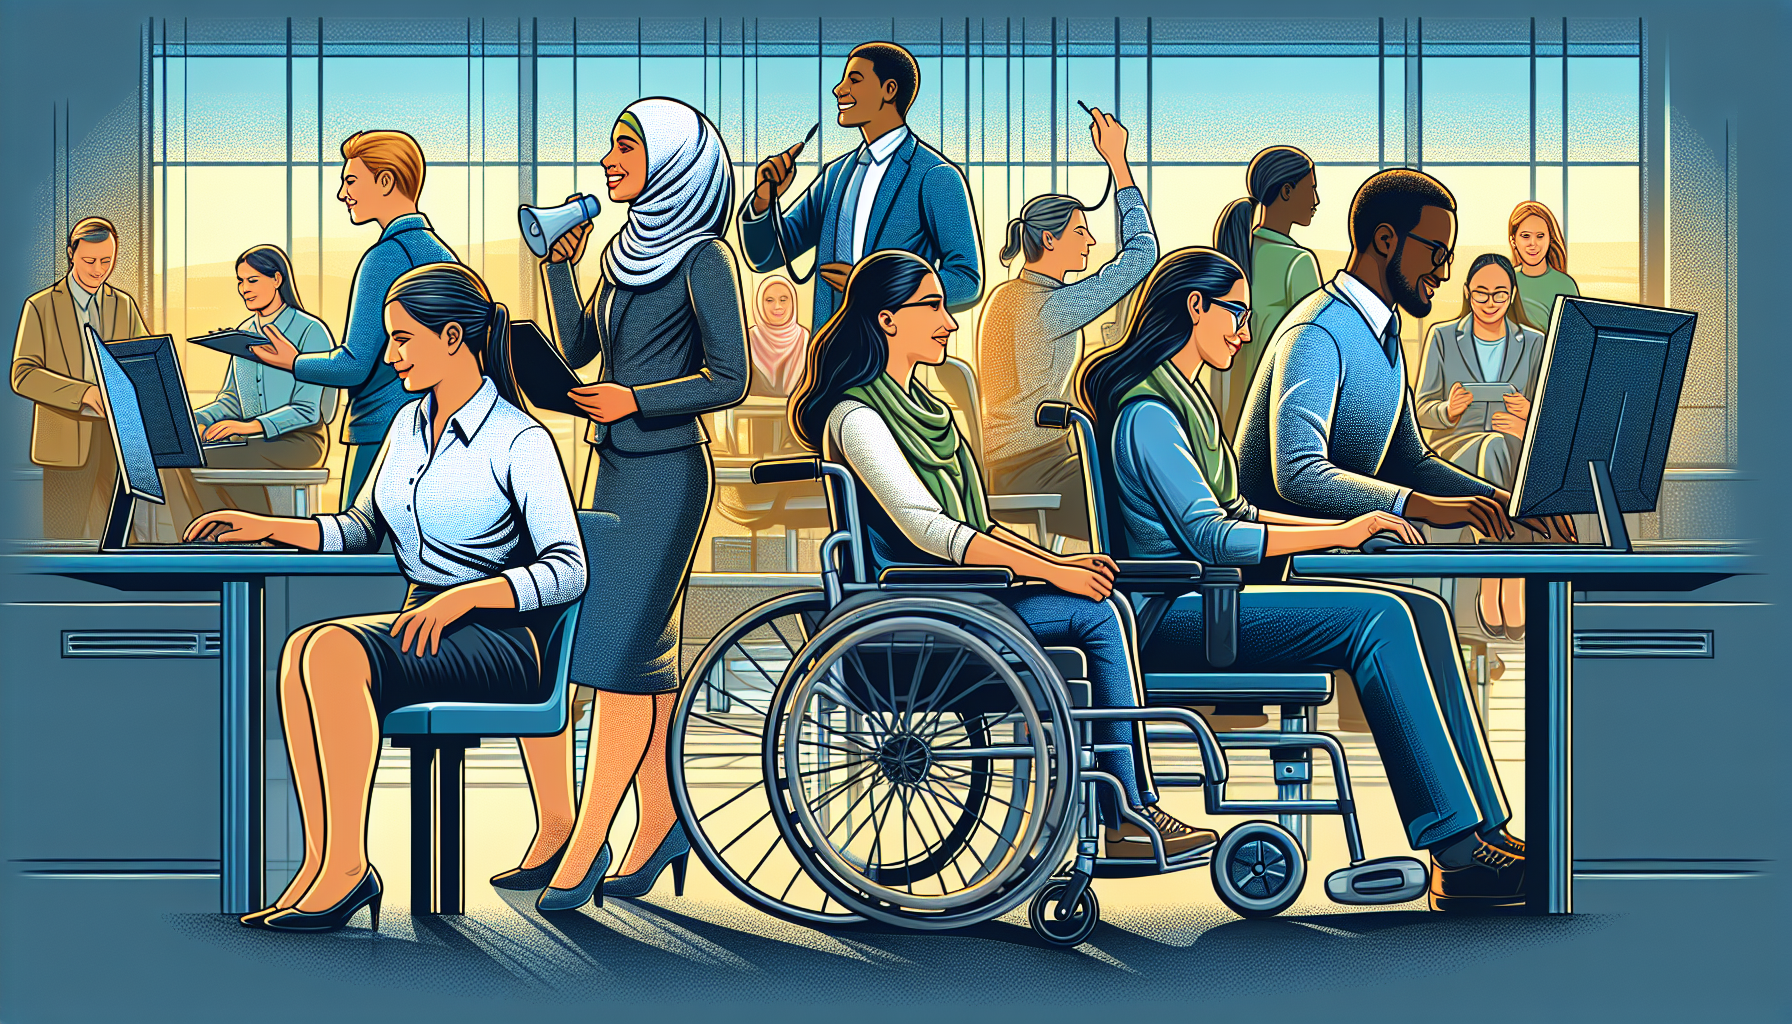 Illustration of diverse group of employees in a workplace setting